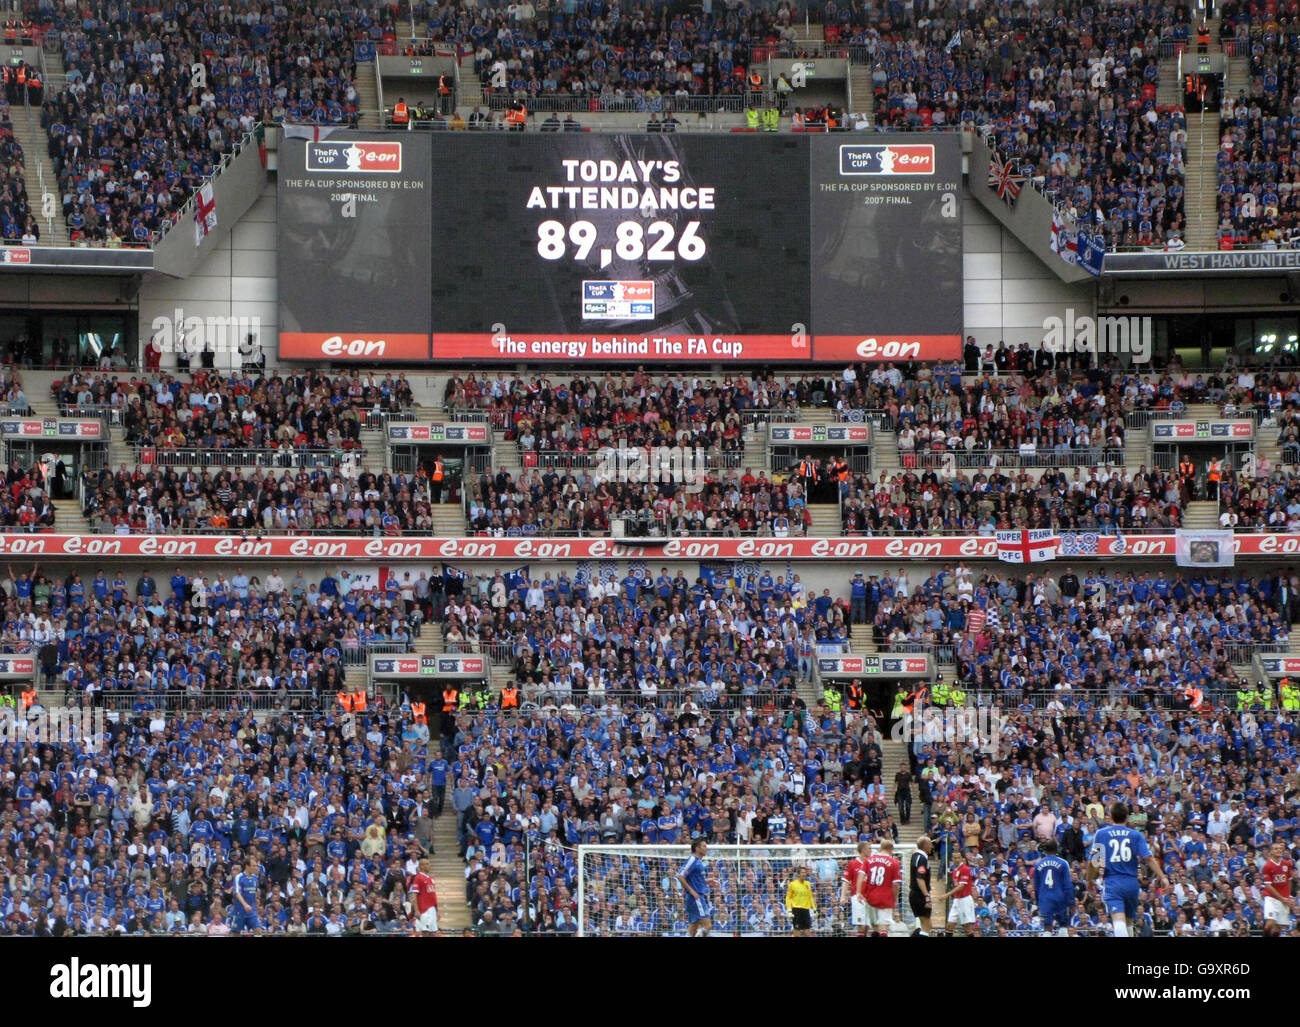 Giant screen shows total attendance during the FA Cup Final between Manchester United and Chelsea at Wembley Stadium, London. Stock Photo